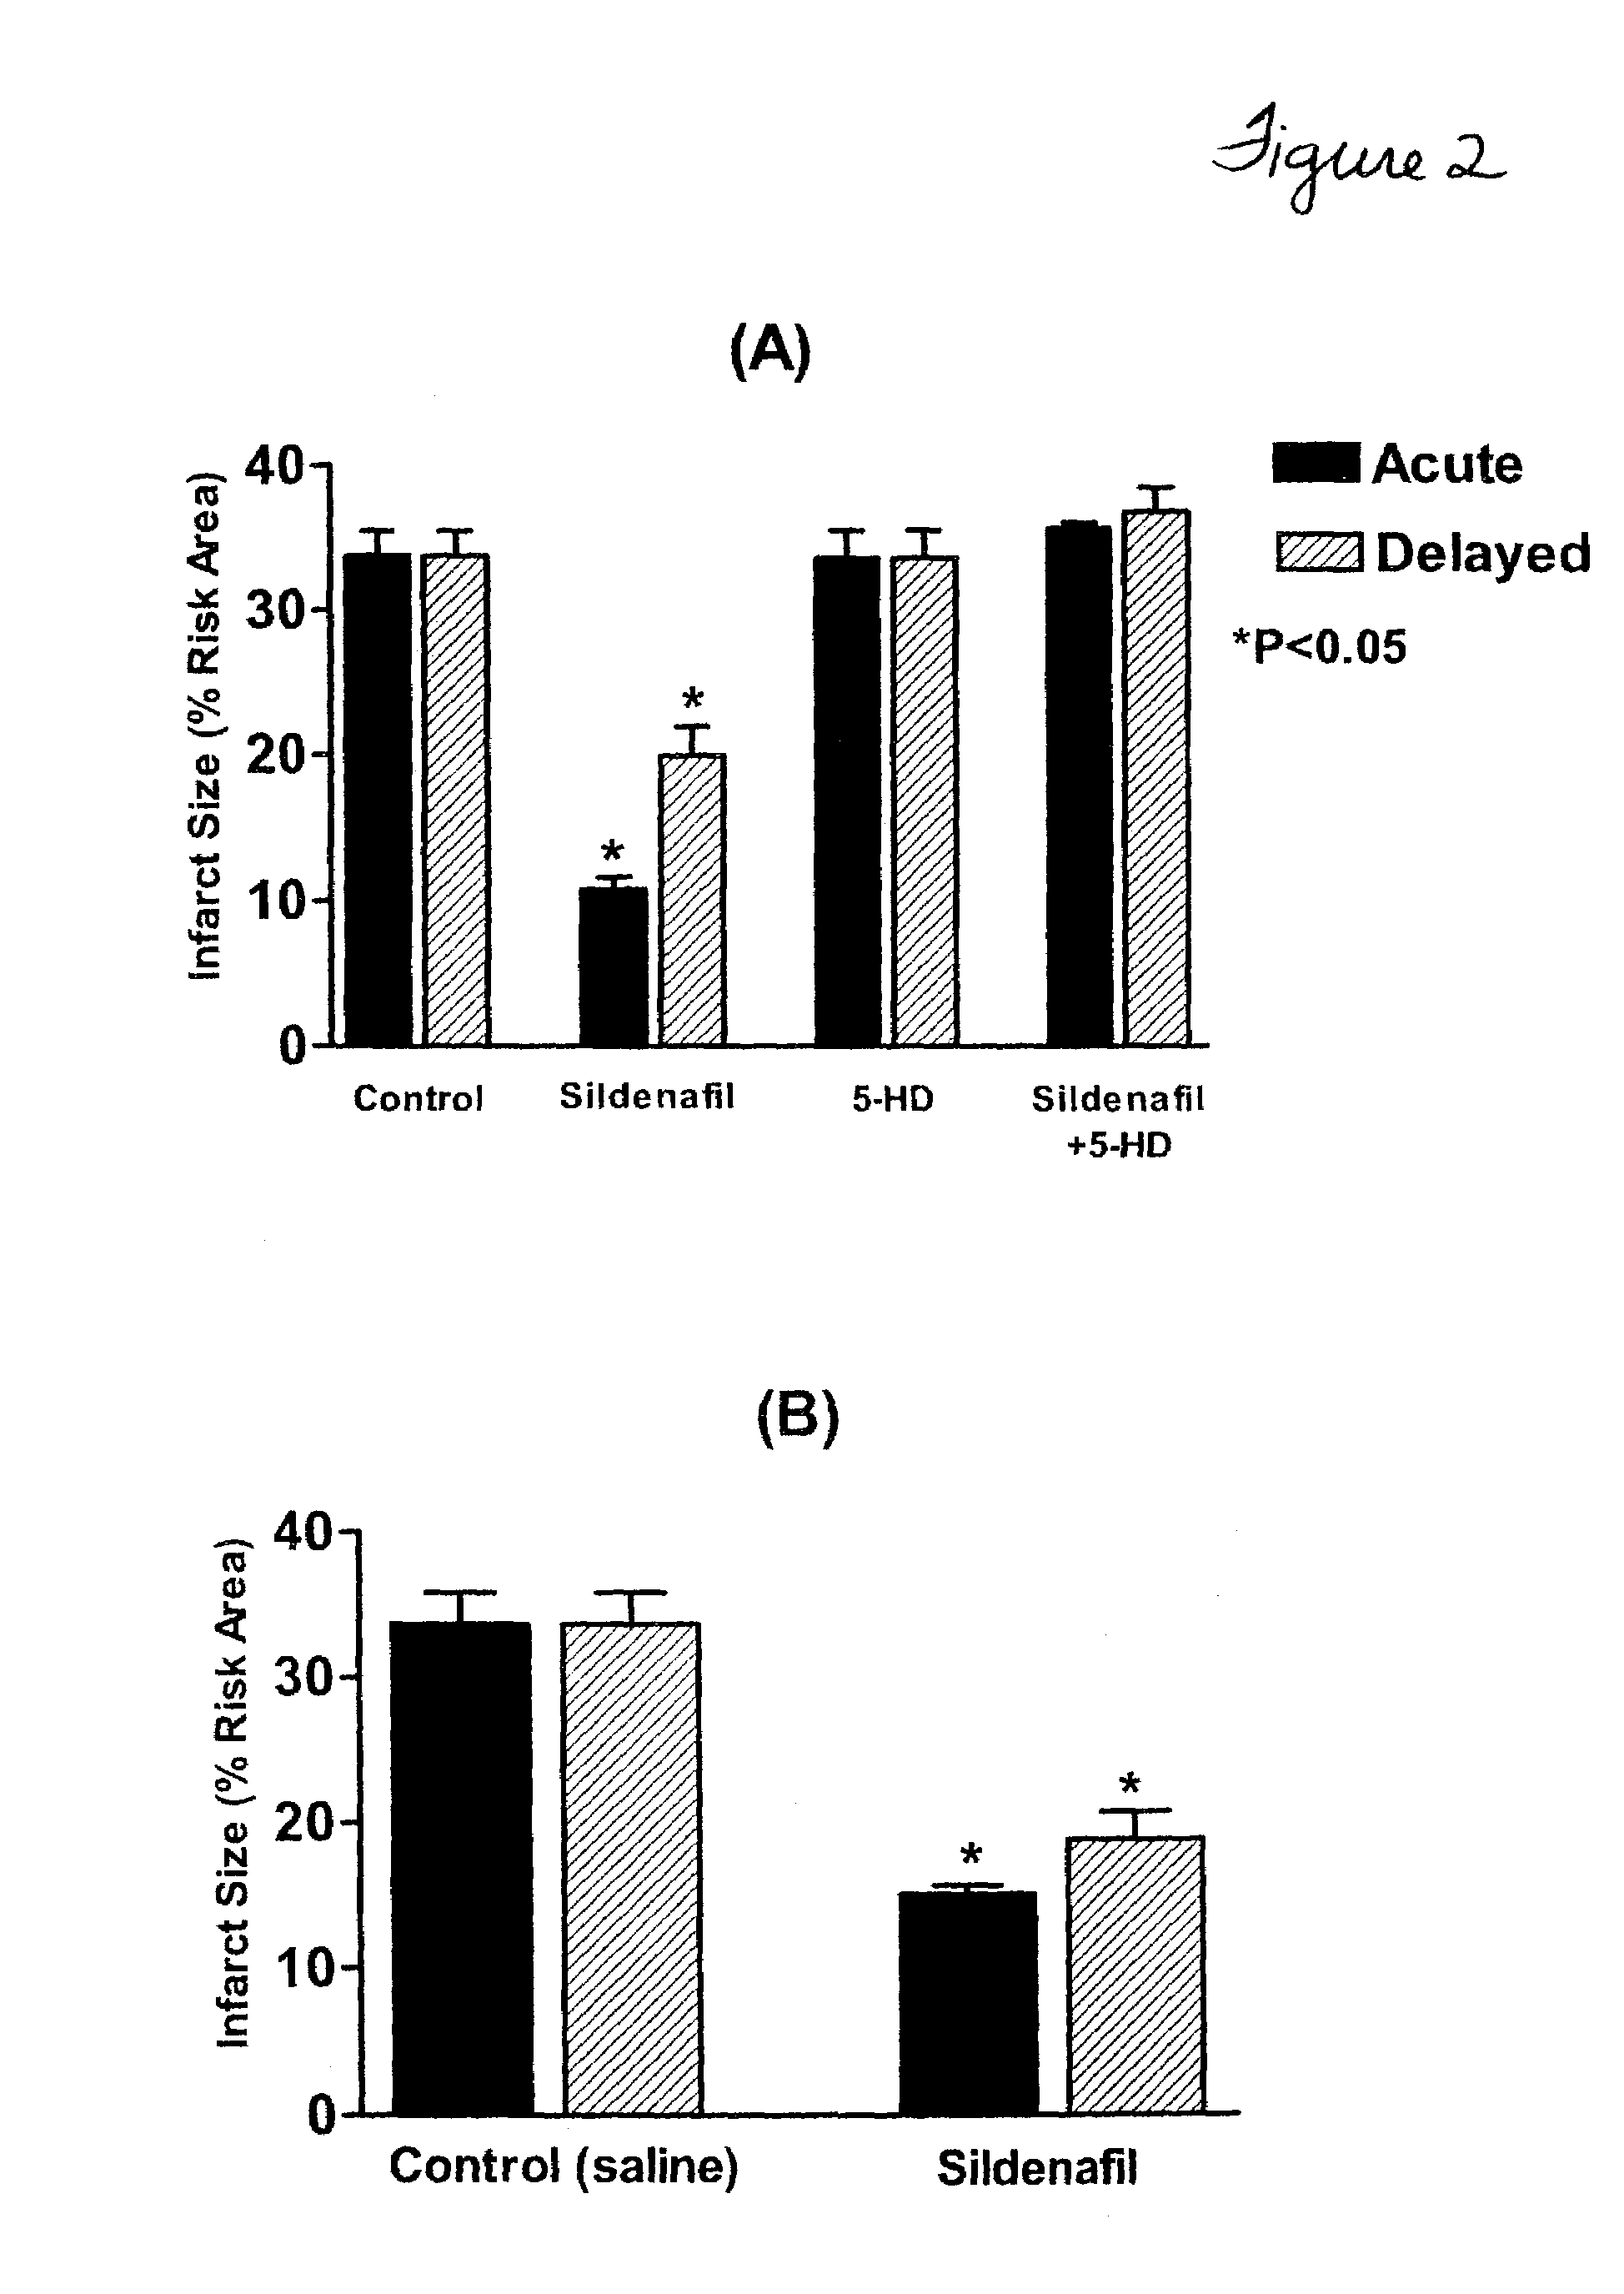 Method of treating myocardial infarction with PDE-5 inhibitors